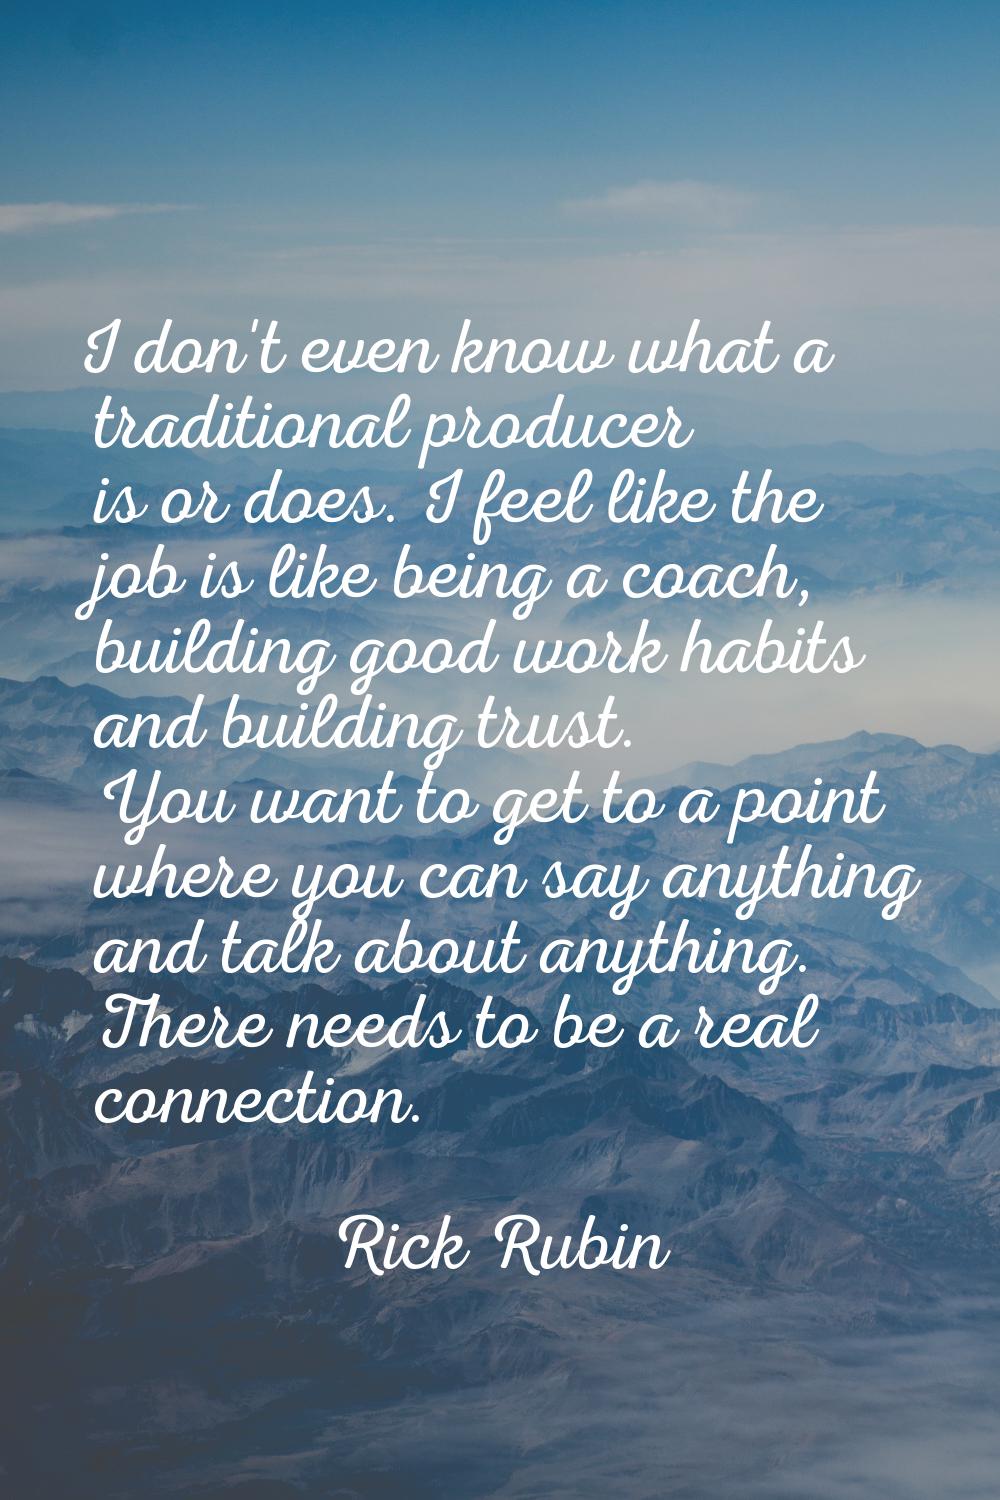 I don't even know what a traditional producer is or does. I feel like the job is like being a coach